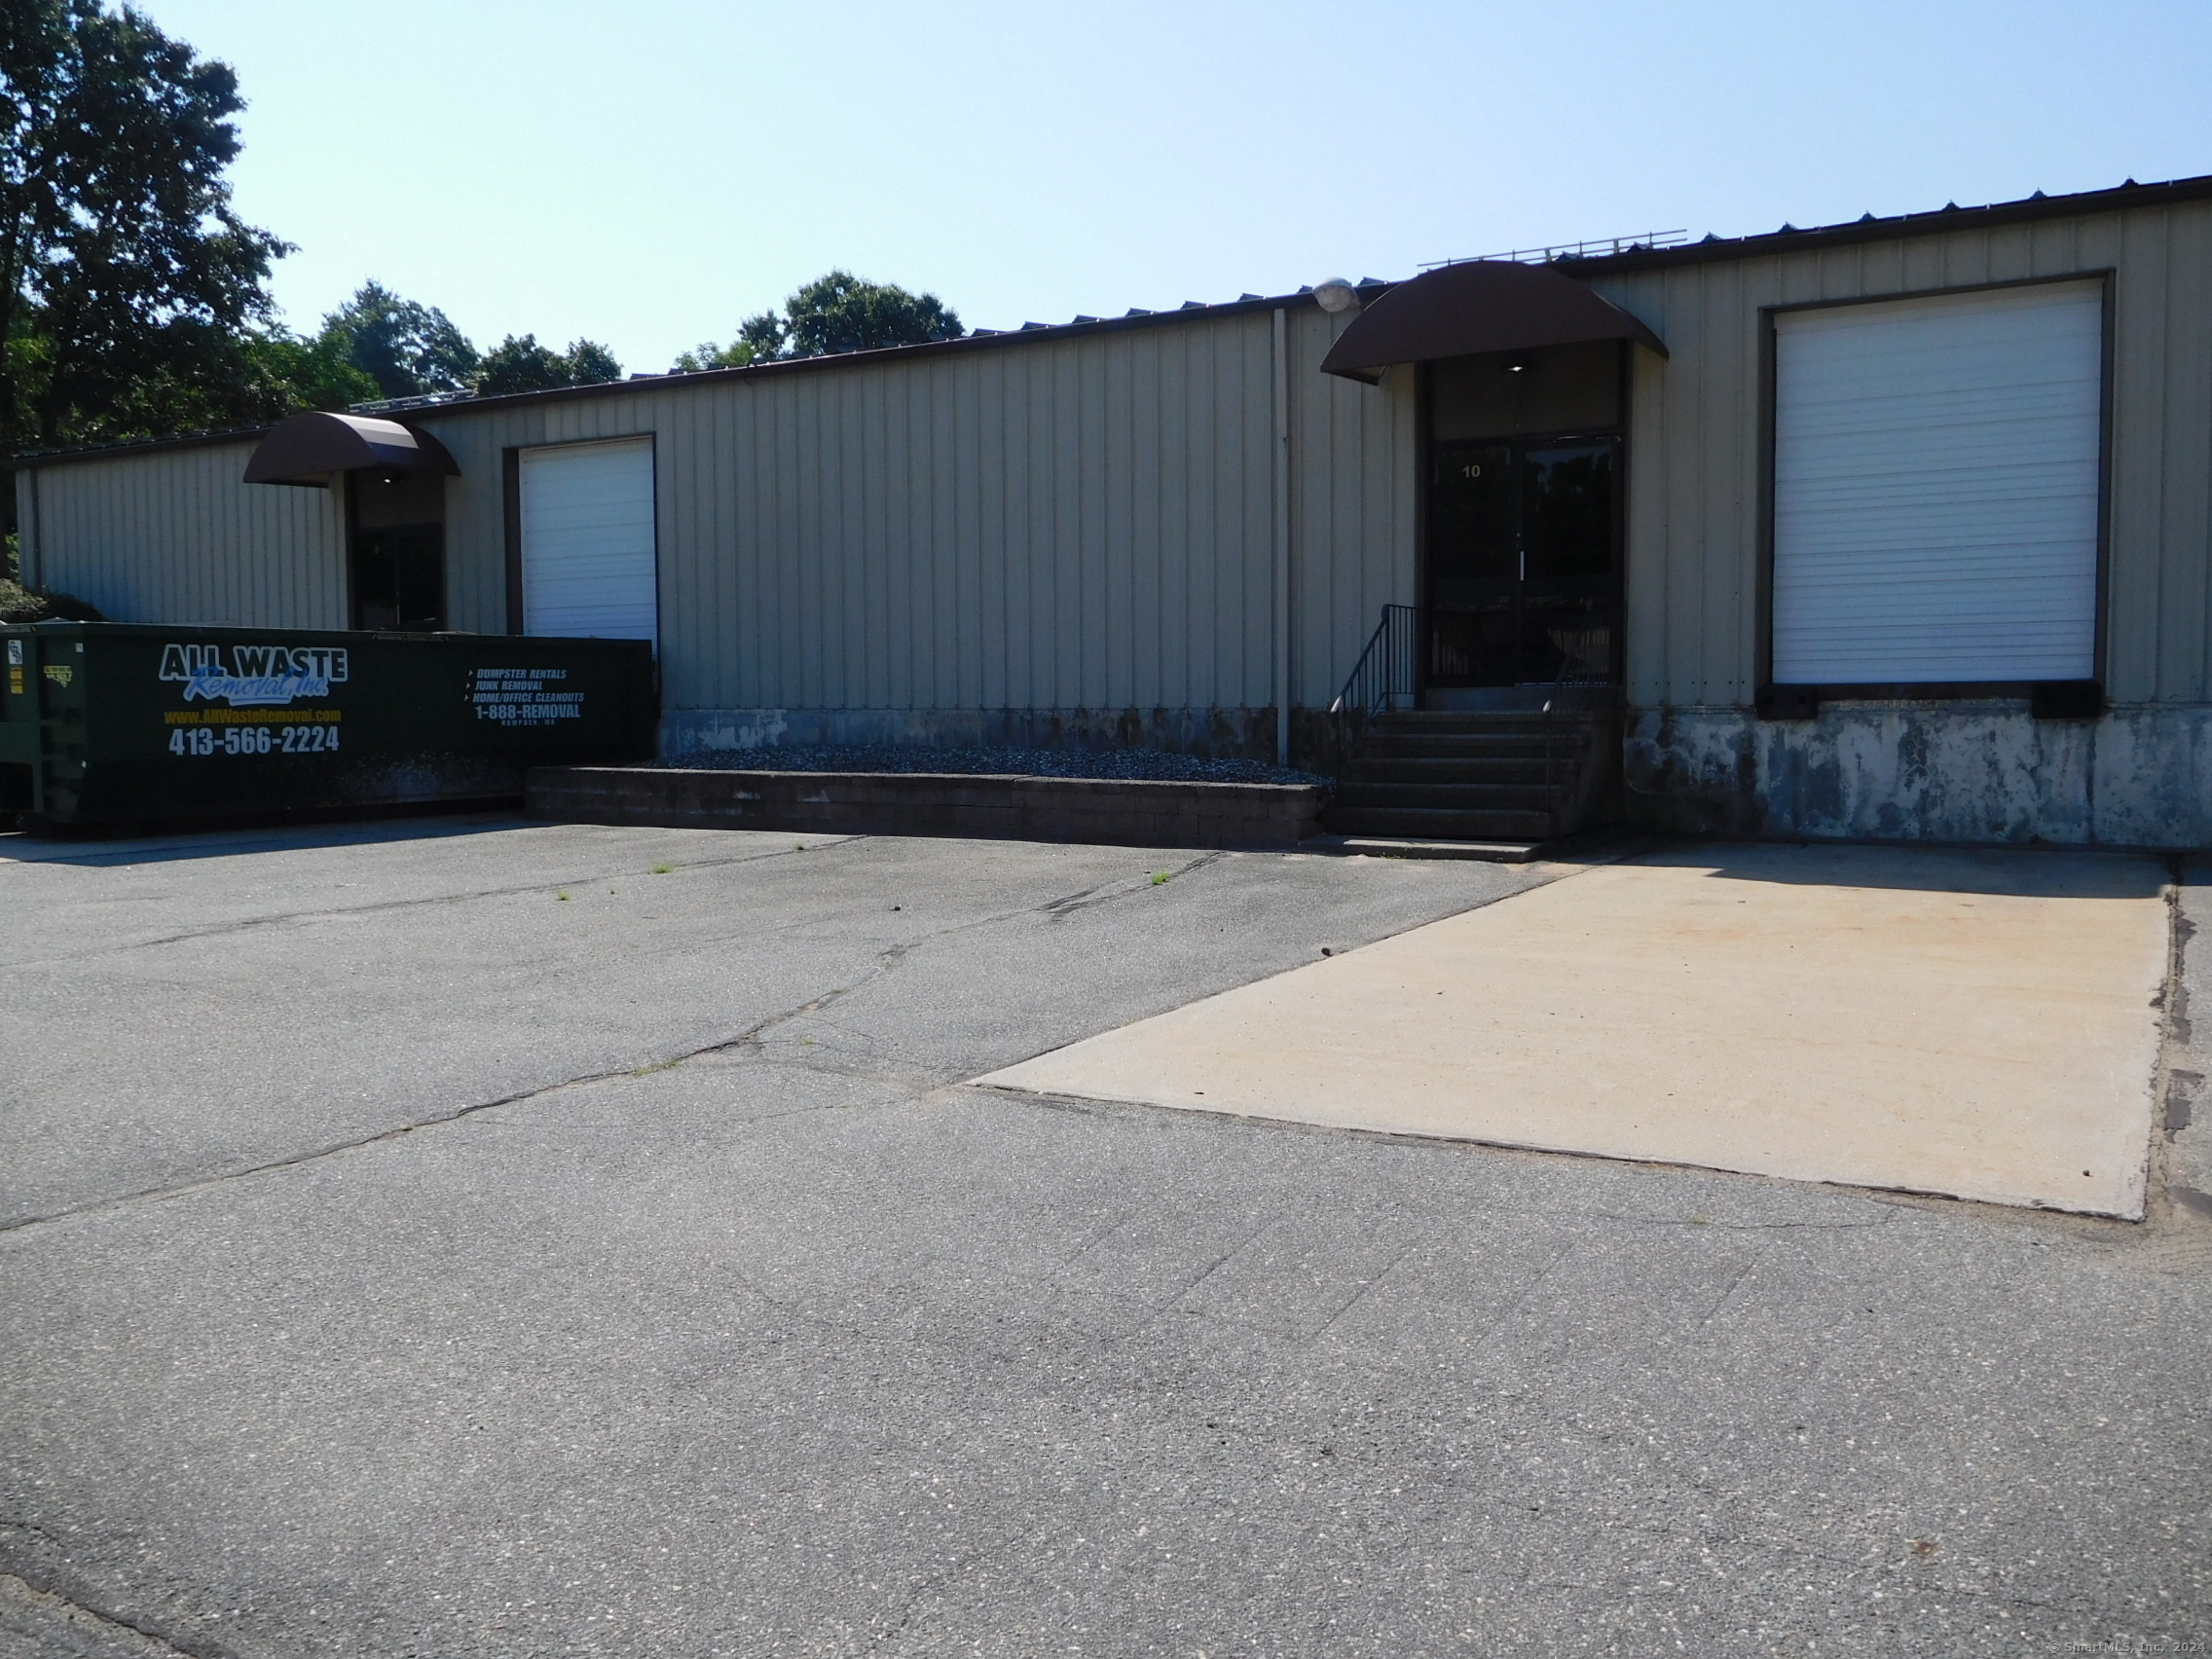 THIS PRIME INDUSTRIAL CONDO PARK UNIT IS AVAILABLE FOR LEASE. 1390 +/- SQ FT, INCLUDES DOCK HEIGHT OVERHEAD DOOR. OFFICE SPACE 330 SQ FT AND 1 PRIVATE RESTROOM IN UNIT. HIGH TRAFFIC AREA WITH EASY ACCESSS TO INTERSTATE 91 NORTH AND SOUTH ALONG WITH ACCESS TO RTE 5. TENANT IS RESPONSIBLE FOR RENT, ELECTRIC, HEAT(PROPANE), HOT WATER, TRASH, INSURANCE, CREDIT CHECK. THIS IS A GREAT SPACE FOR ALL TYPES OF CONTRACTORS, ADDITIONAL STORAGE TO CLEAN OUT YOUR HOME OR THE PERSON WHO HAS A HOBBY!